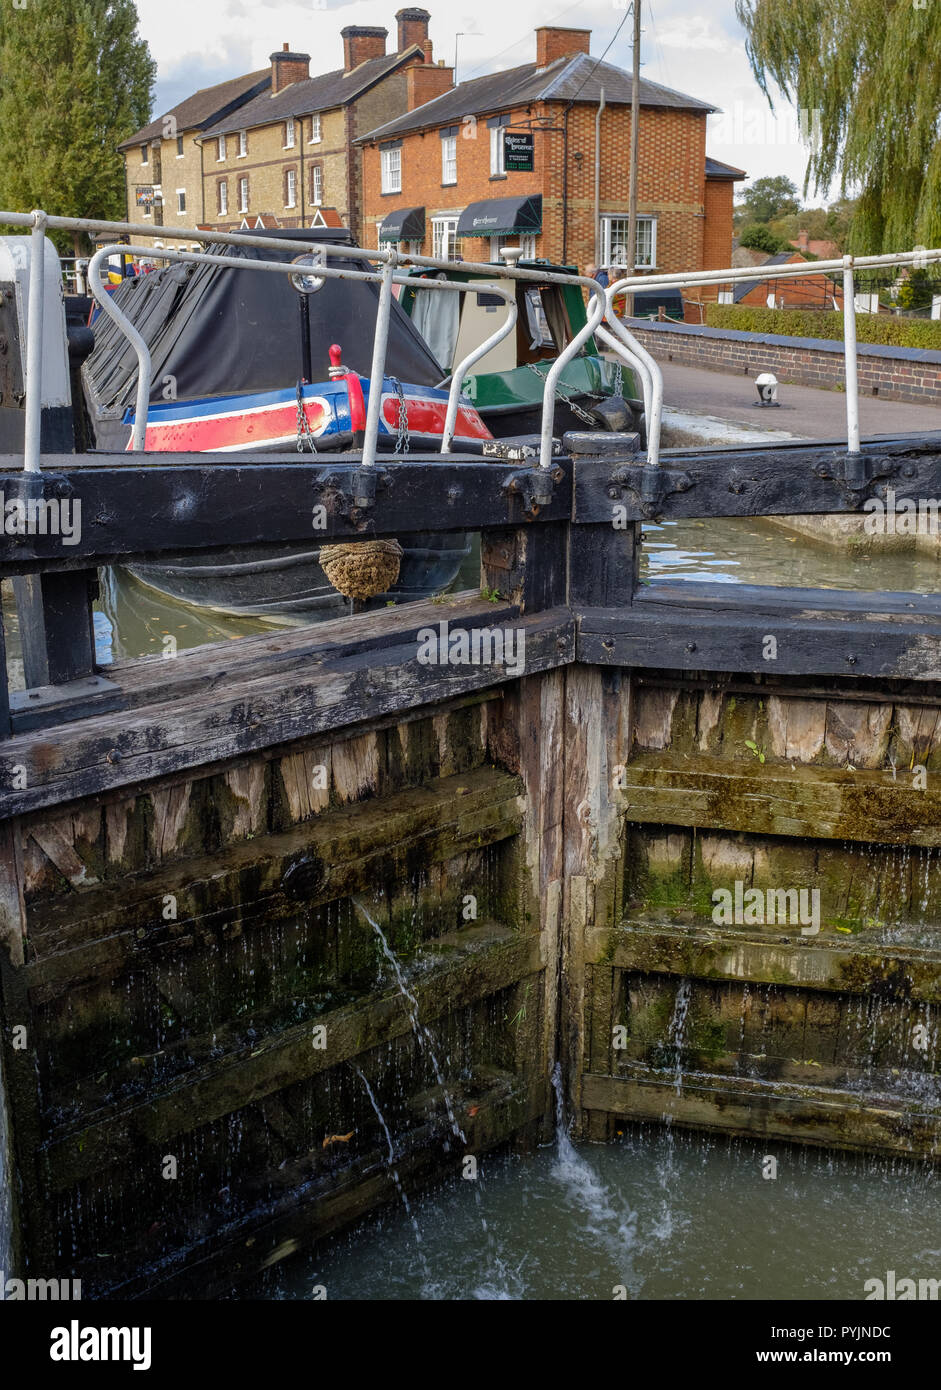 Two narrow boats at lock on Grand Union Canal, near The Canal Museum at Stoke Bruerne on the Grand Union Canal, Northampton, England Stock Photo